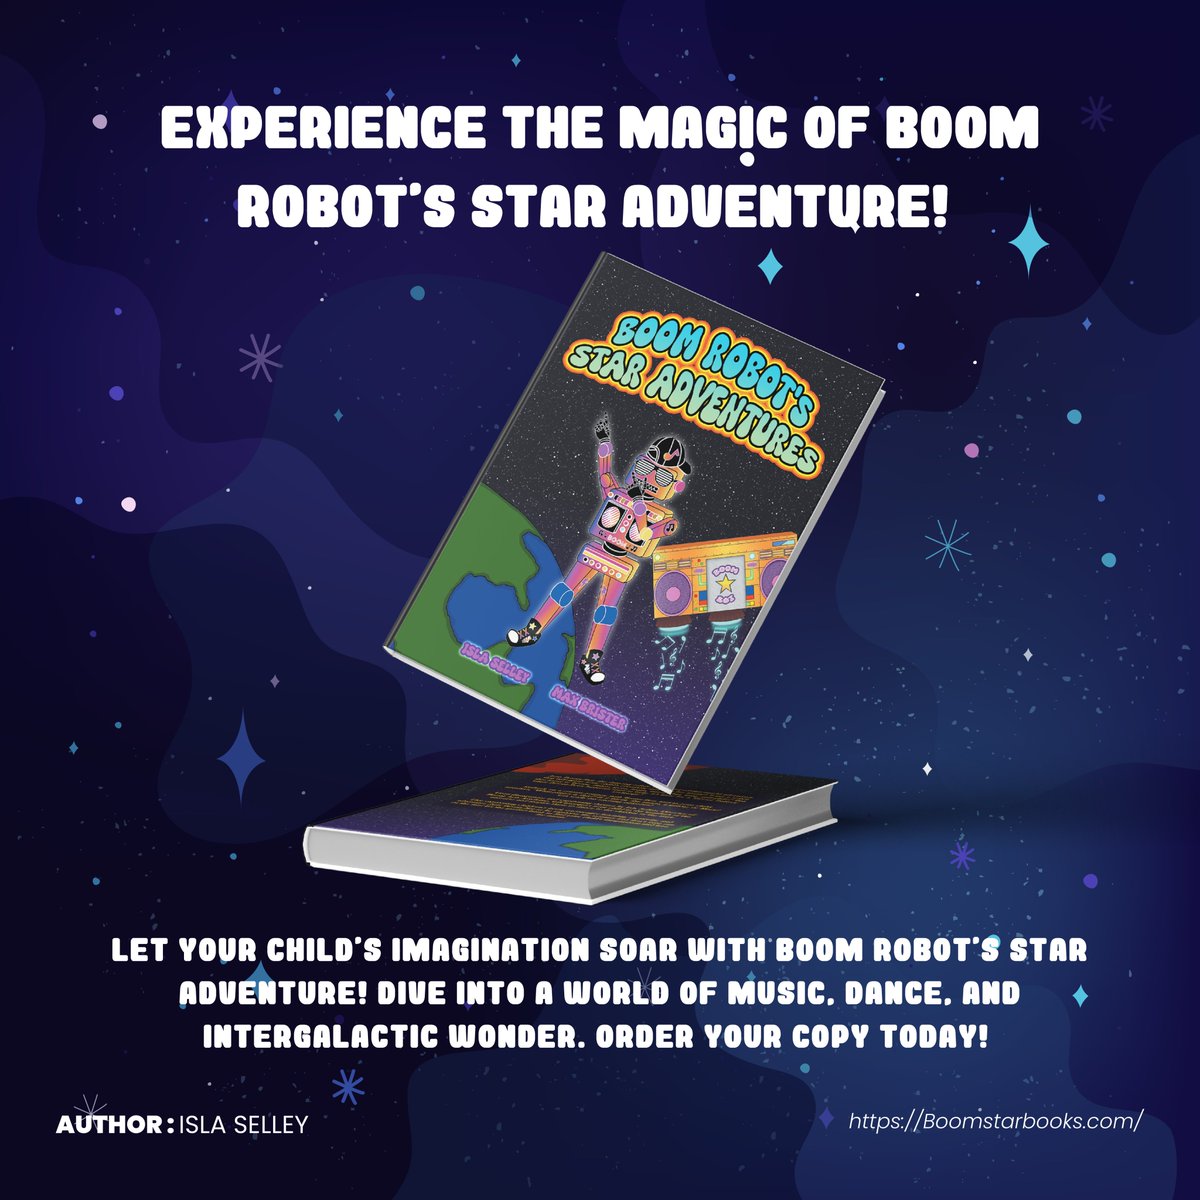 Experience the magic of Boom Robot's Star Adventure! Available now for young dreamers and adventurers. #ImmersiveReading